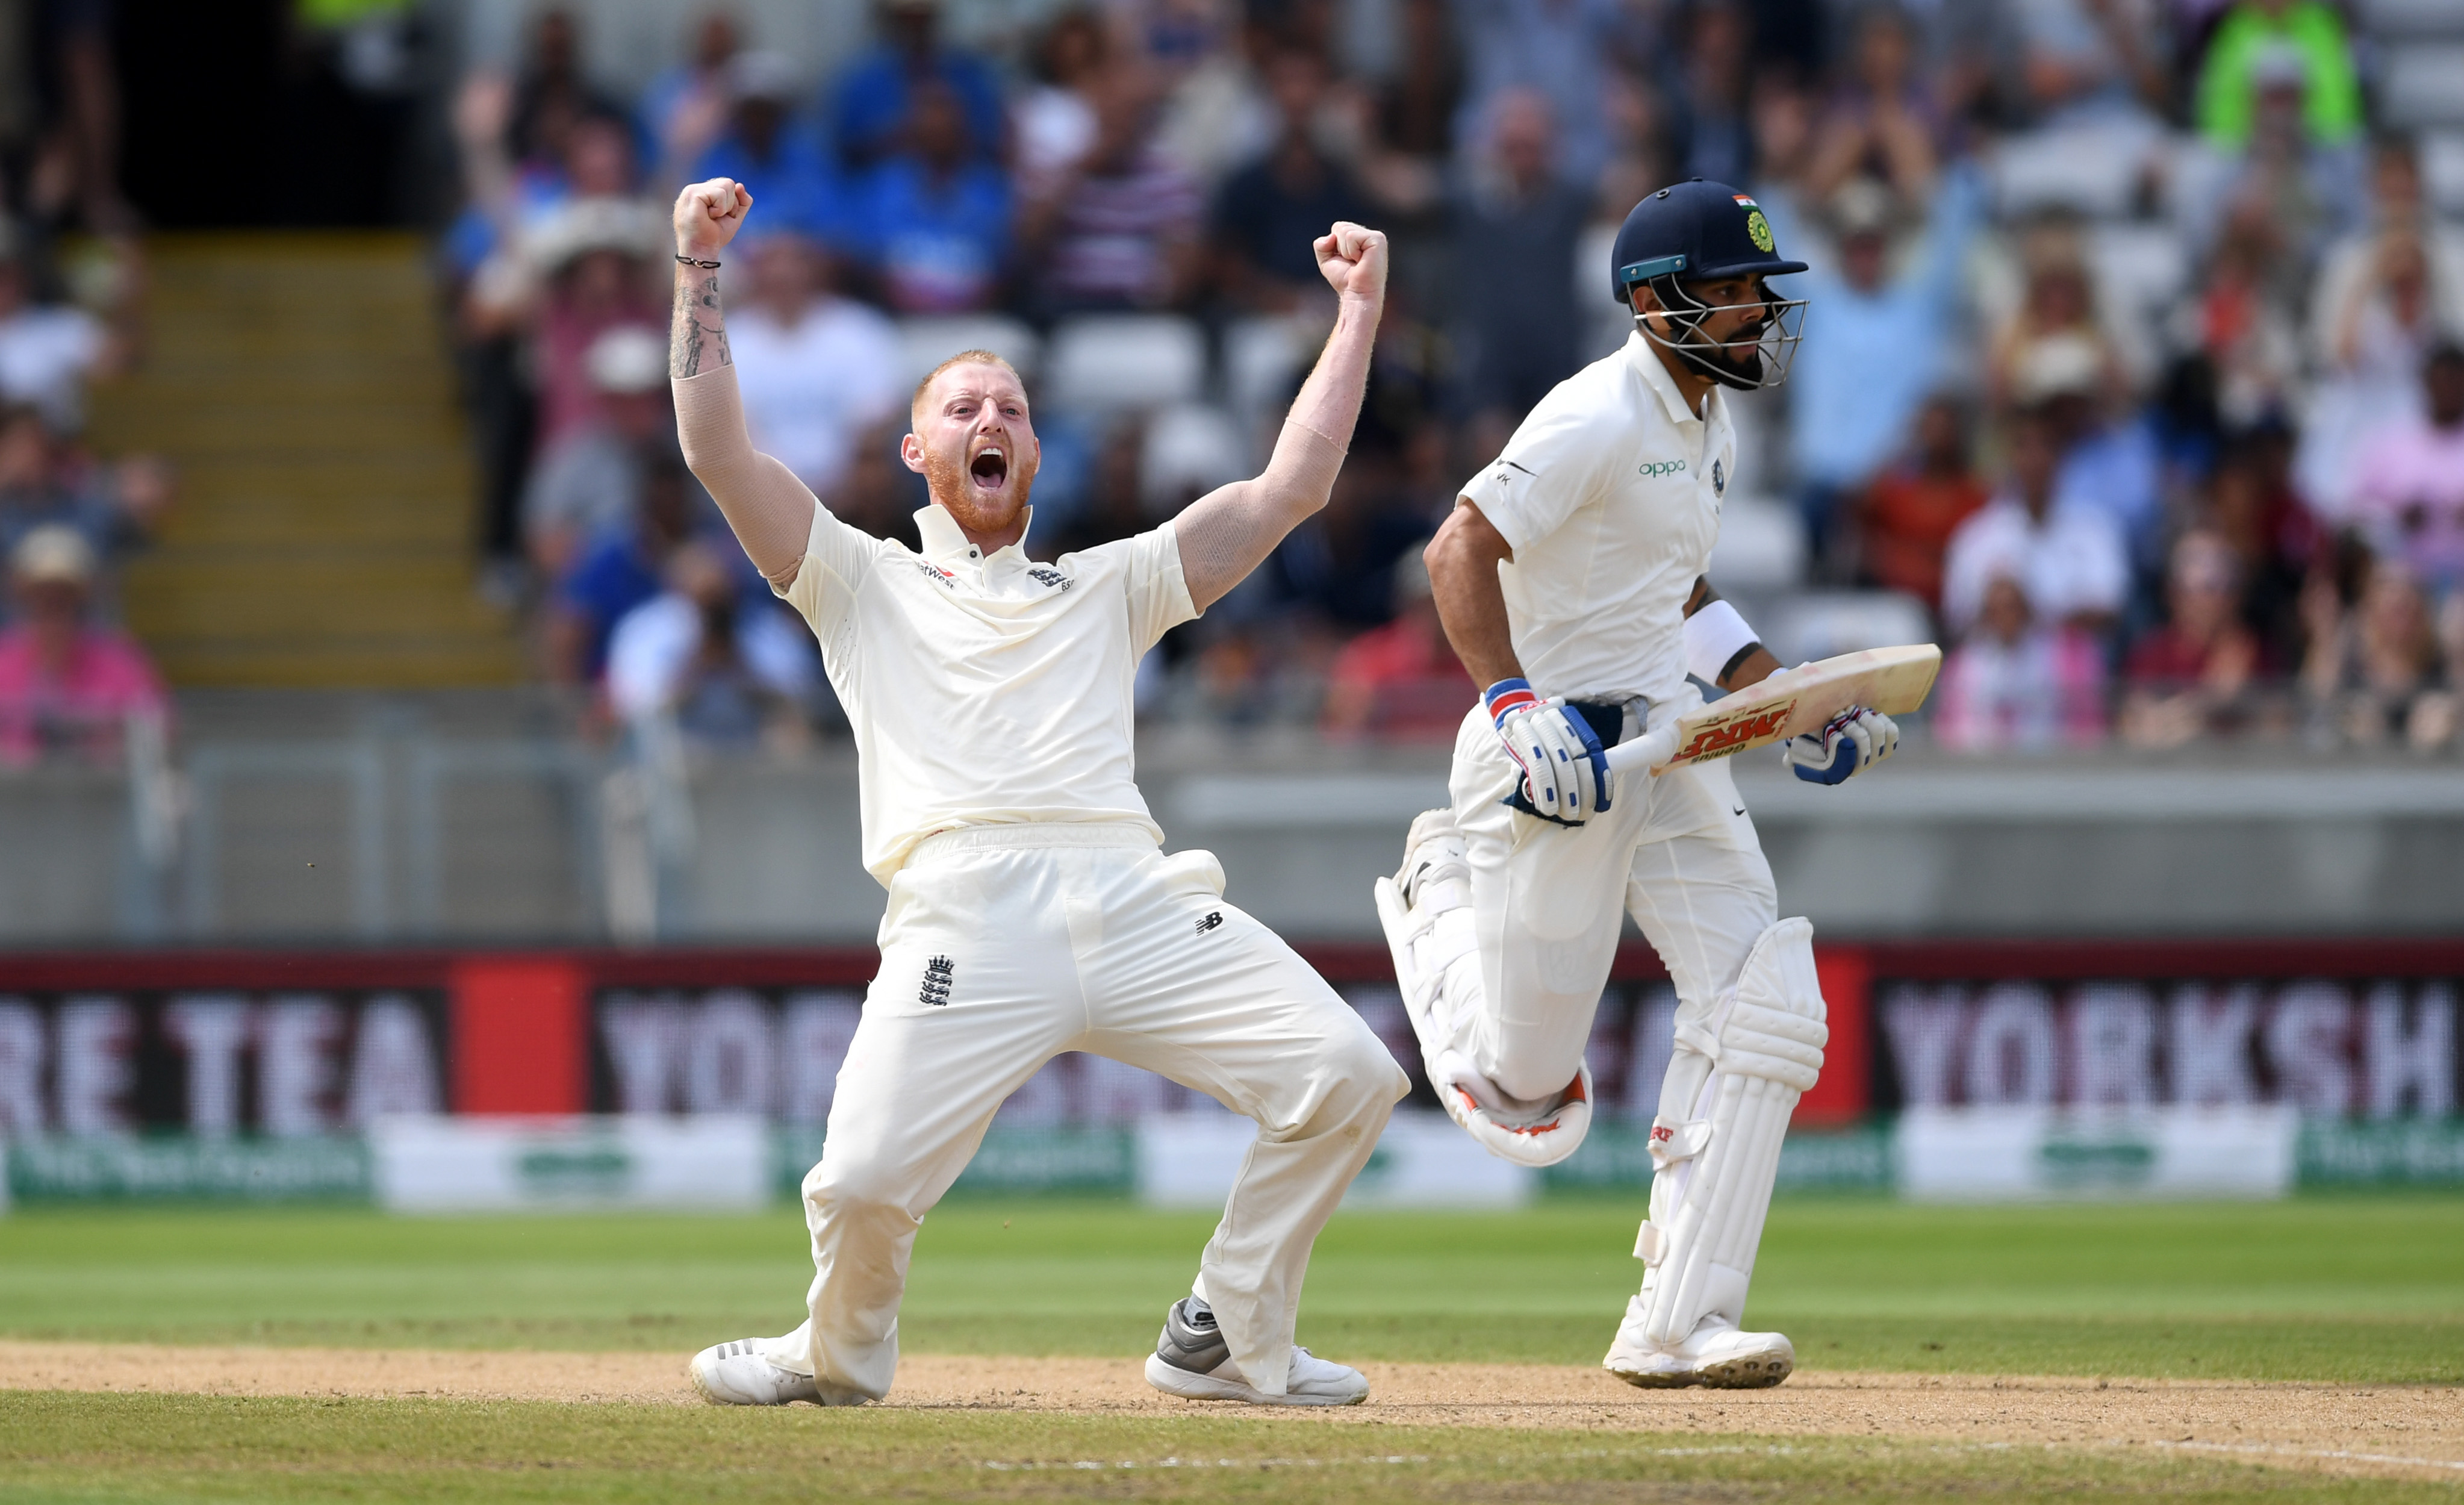 Ben Stokes trumps Jason Holder to become No.1 all-rounder